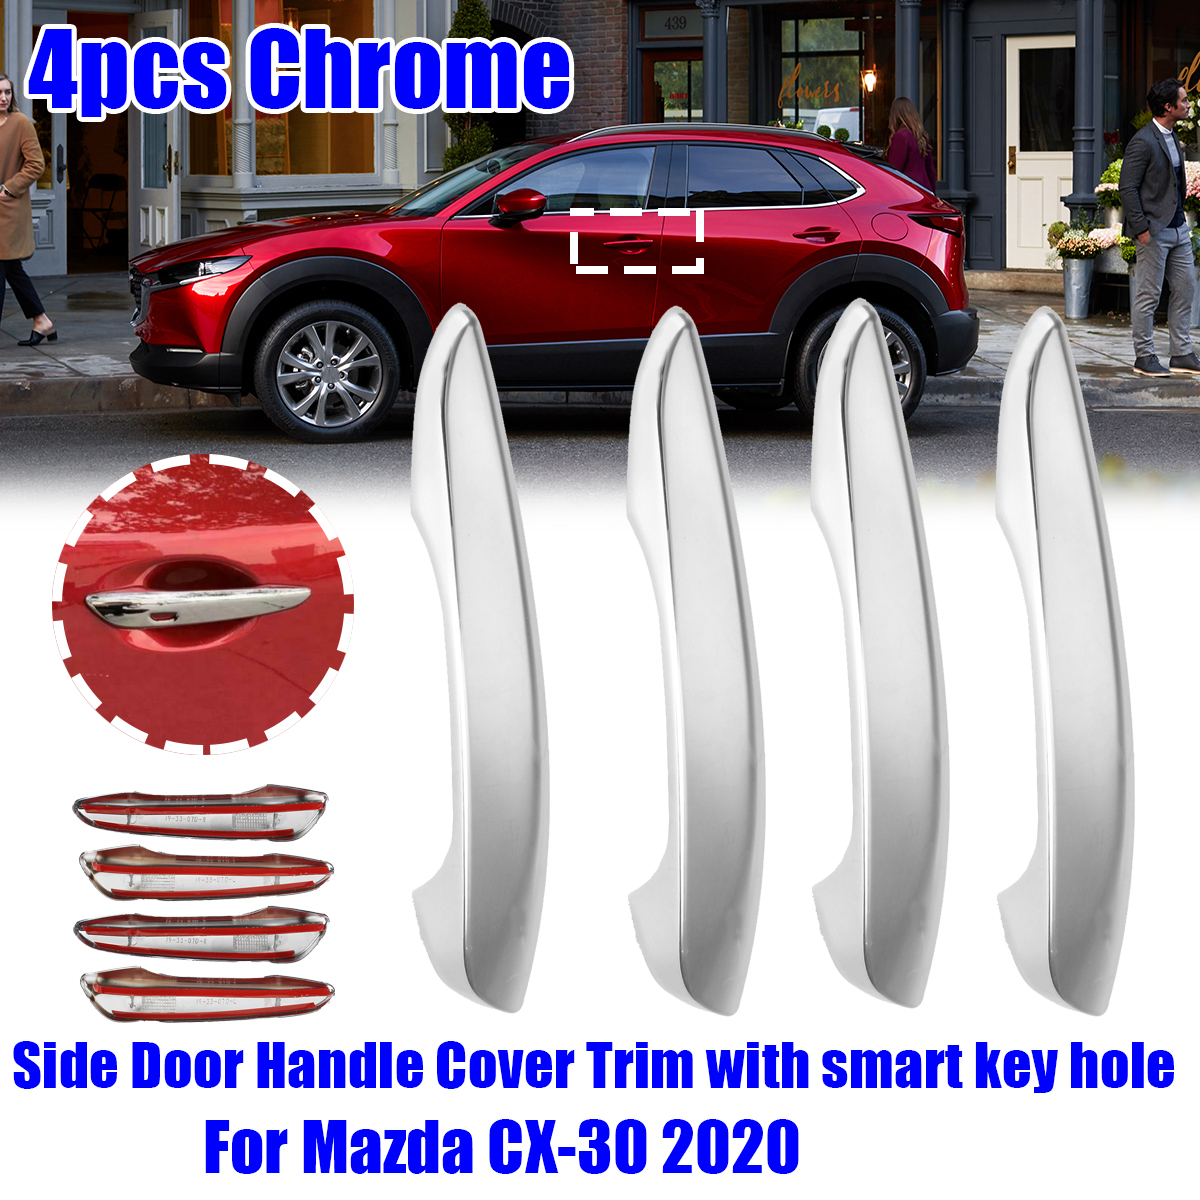 Chrome-Handle-Protective-Cover-Door-Handle-Outer-Bowls-Trim-For-Mazda-CX-30-2020-1751667-7